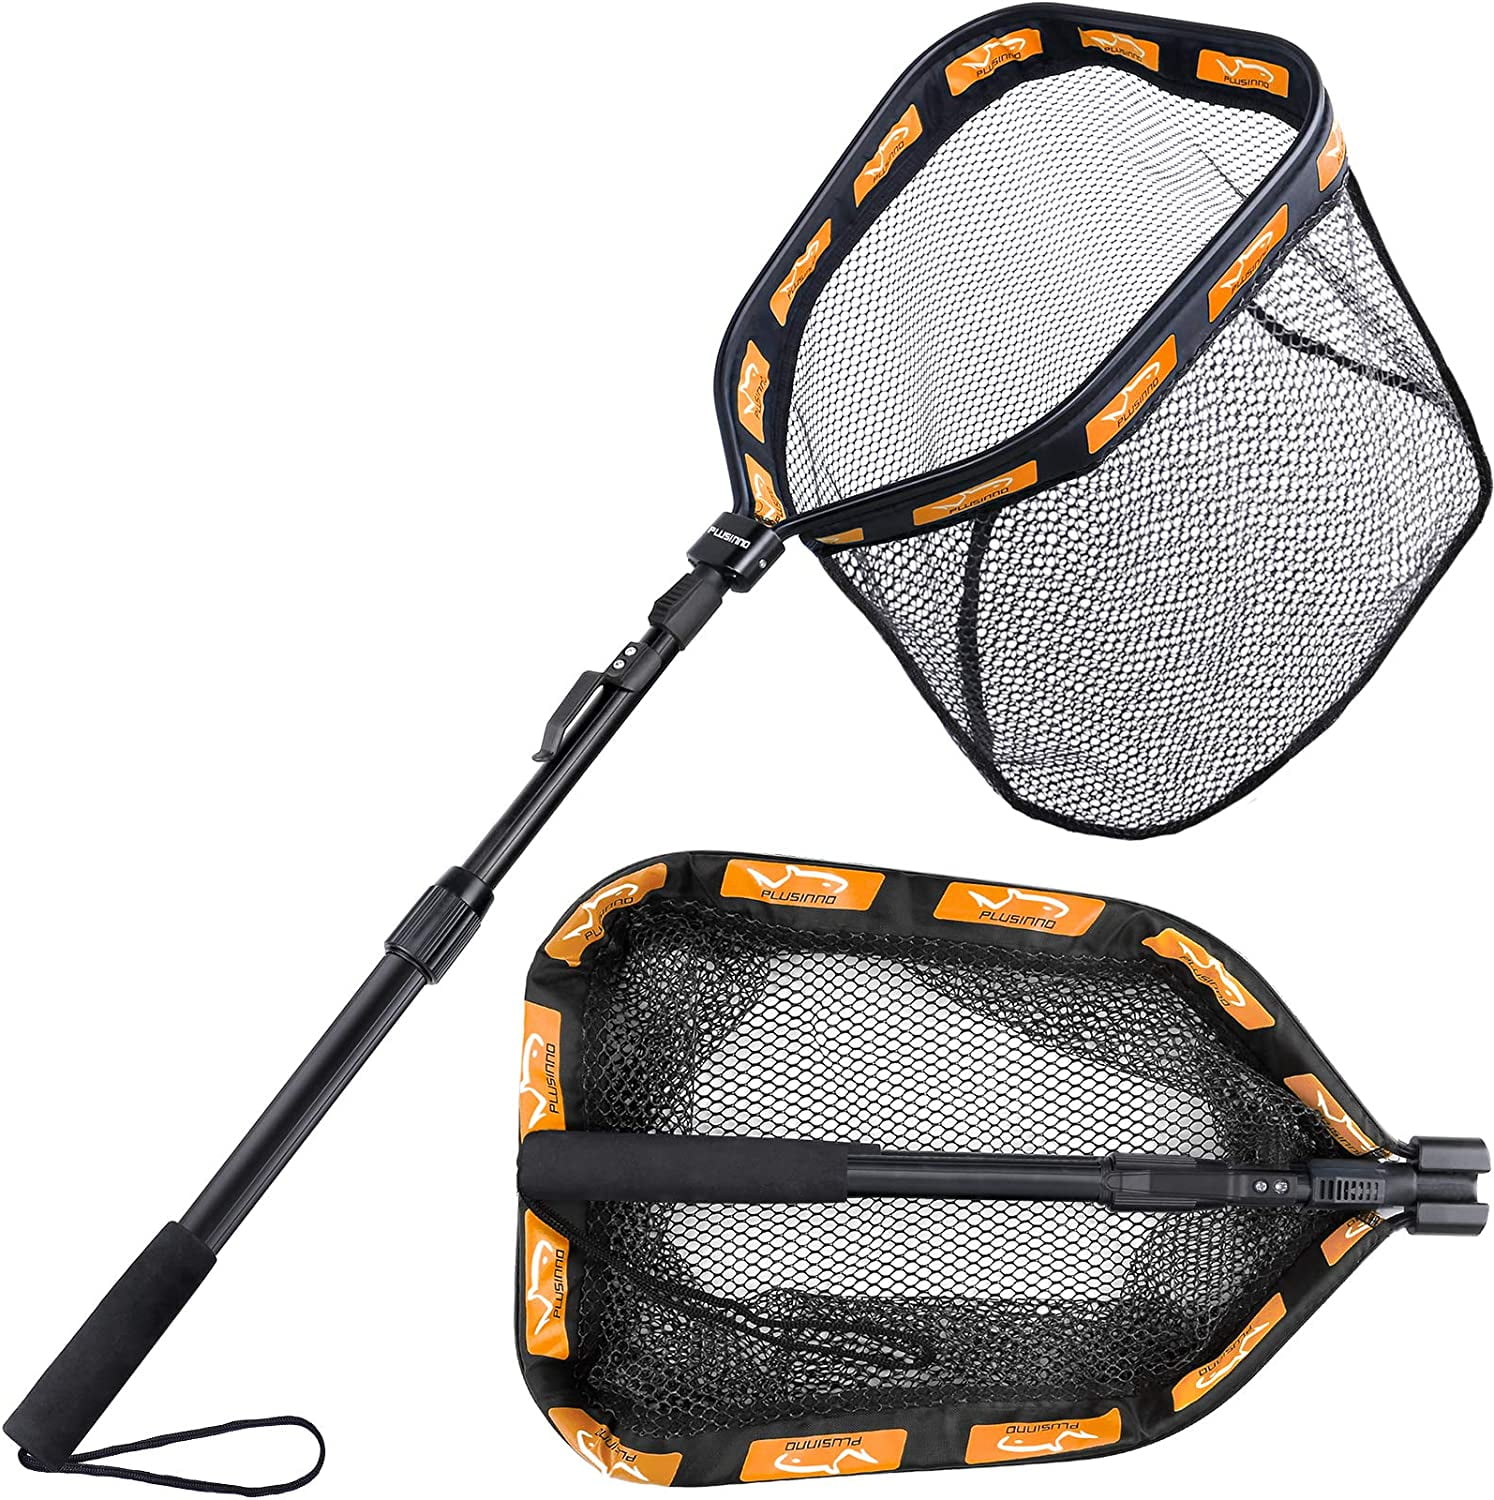 PLUSINNO Floating Fishing Net for Steelhead Bass Rubber Coated Landing Net for Easy Catch & Release for Easy Transportation & Storage Salmon Kayak Trout Fishing Fly Catfish 